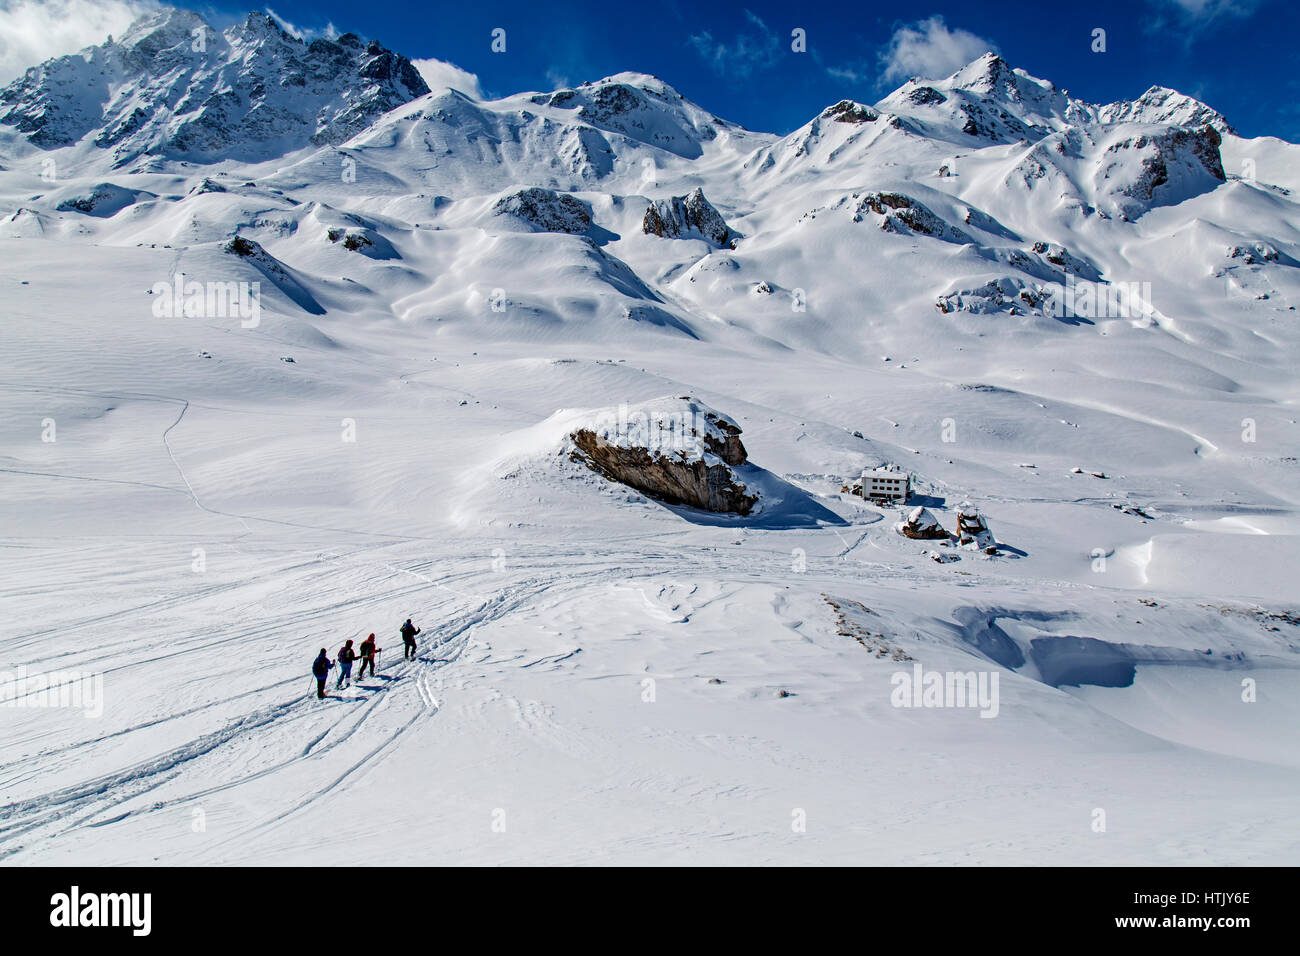 Ski touring and snowshoeing in the Austrian Alps. Stock Photo